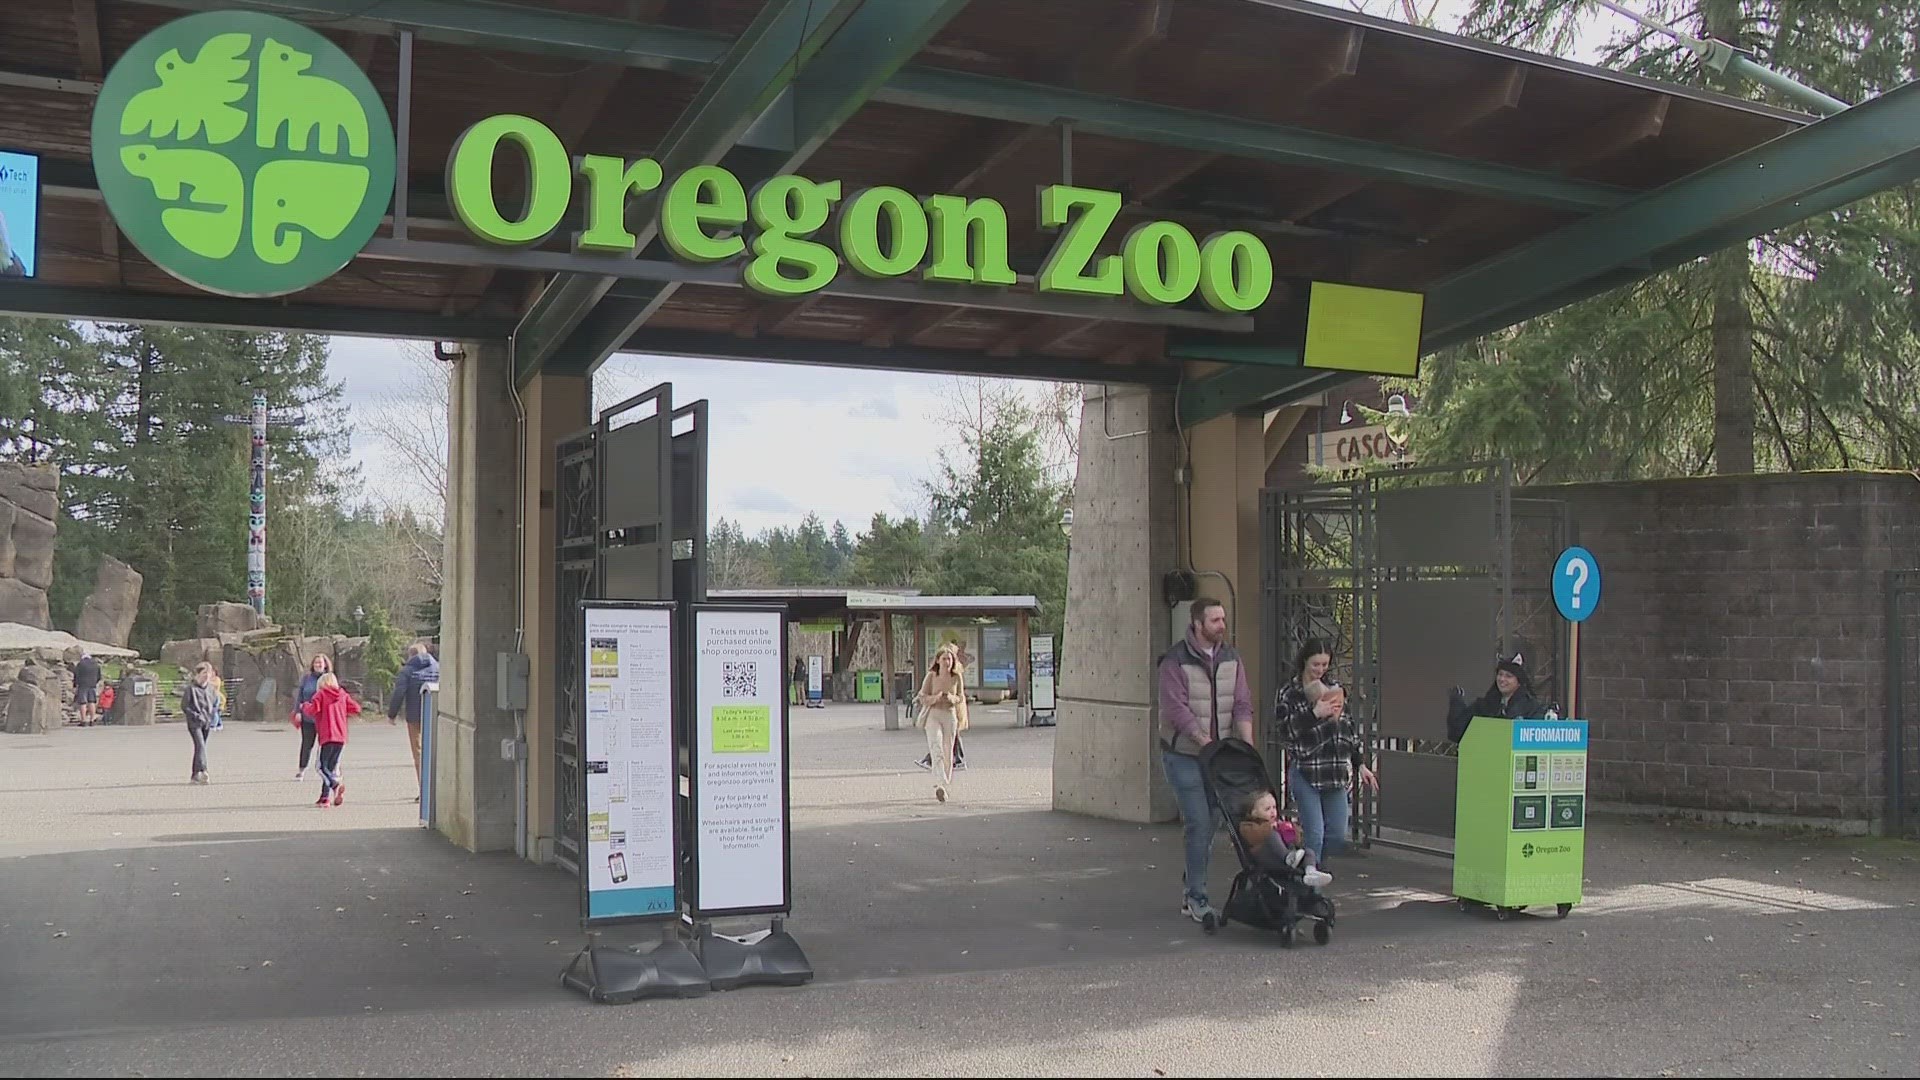 The Oregon Zoo’s nearly $400 million improvement bond includes funding a new veterinary center, habitats for the animals and education spaces.